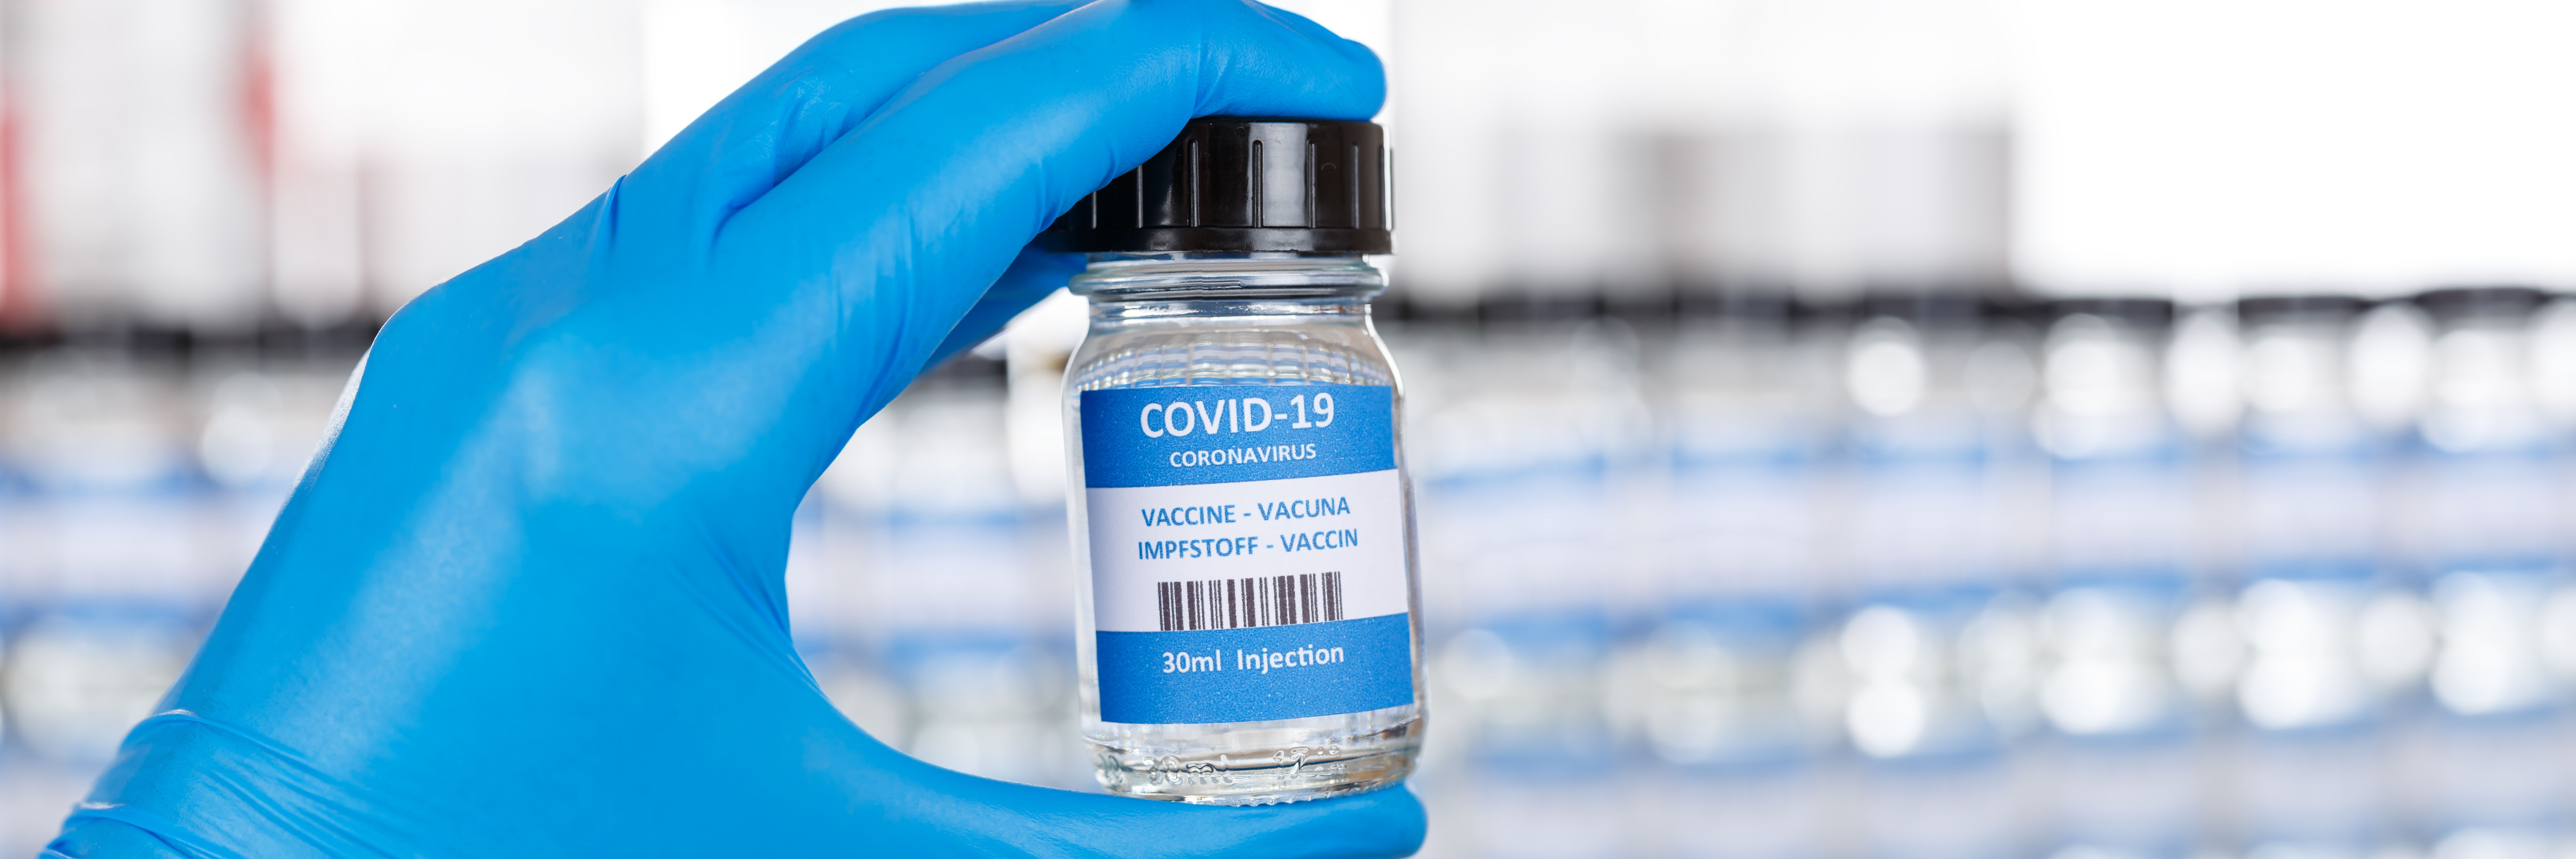 We offer COVID-19 Vaccines for ages 5+!